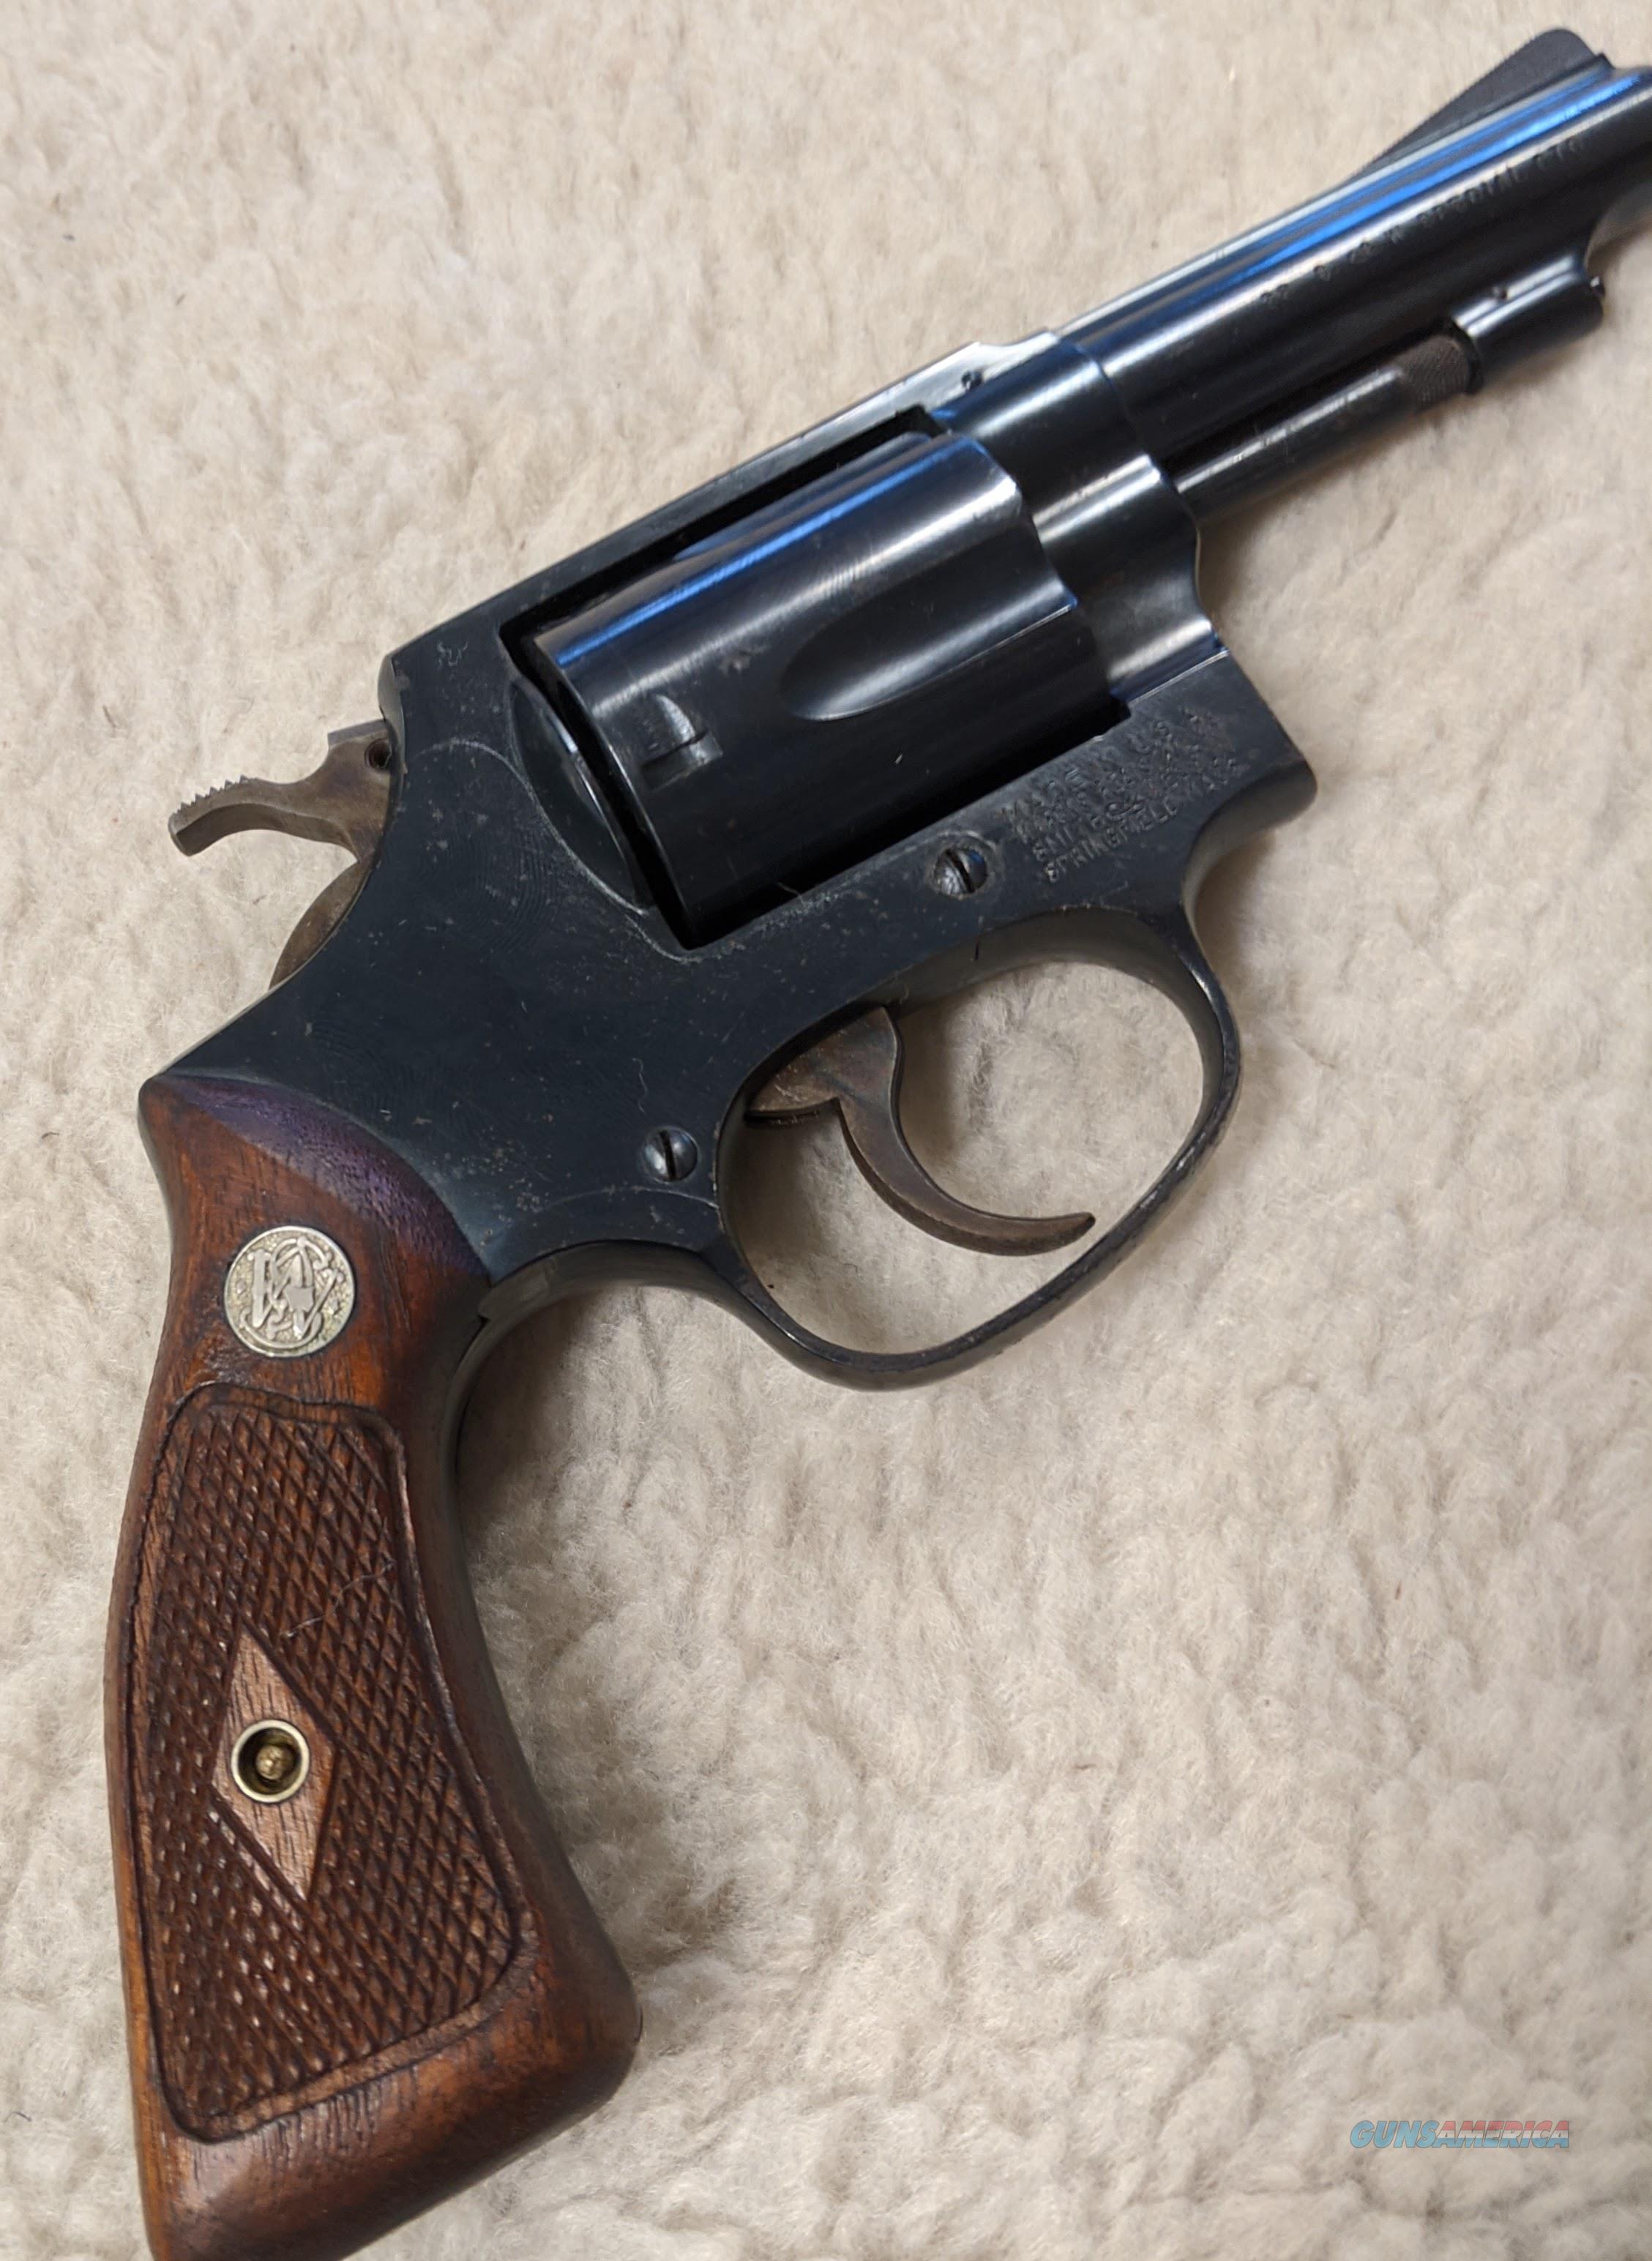 Smith & Wesson Model 36 *Used* for sale at Gunsamerica.com: 933491704